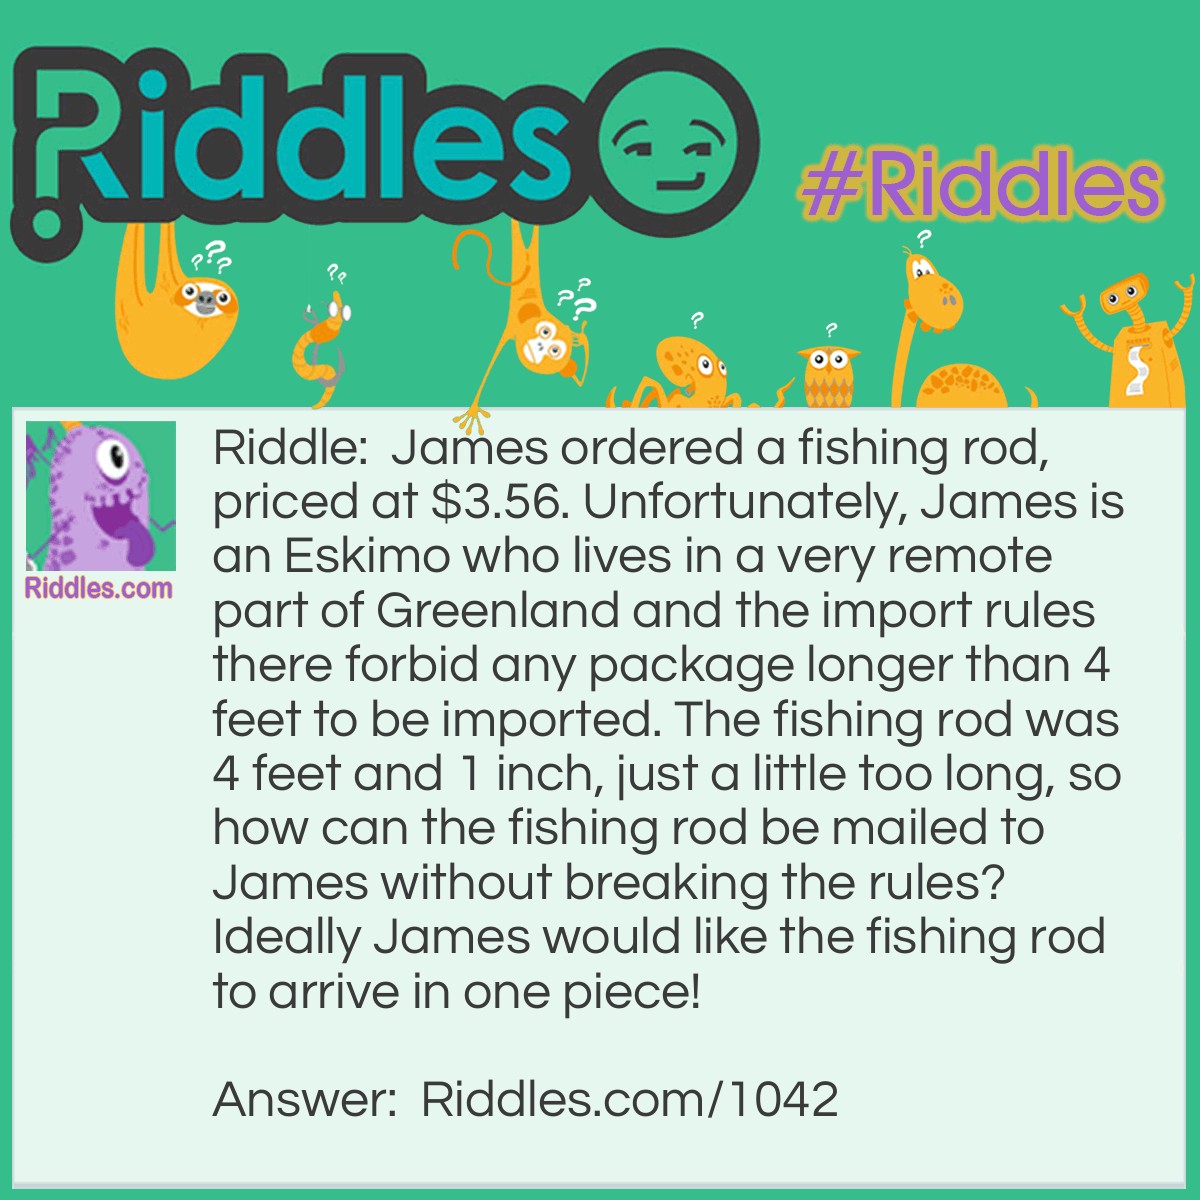 Riddle: James ordered a fishing rod, priced at $3.56. Unfortunately, James is an Eskimo who lives in a very remote part of Greenland and the import rules there forbid any package longer than 4 feet to be imported. The fishing rod was 4 feet and 1 inch, just a little too long, so how can the fishing rod be mailed to James without breaking the rules? Ideally, James would like the fishing rod to arrive in one piece! Answer: Insert the fishing rod into a box which measures 4 feet on all sides, the fishing rod will fit within the diagonal of the box with room to spare.